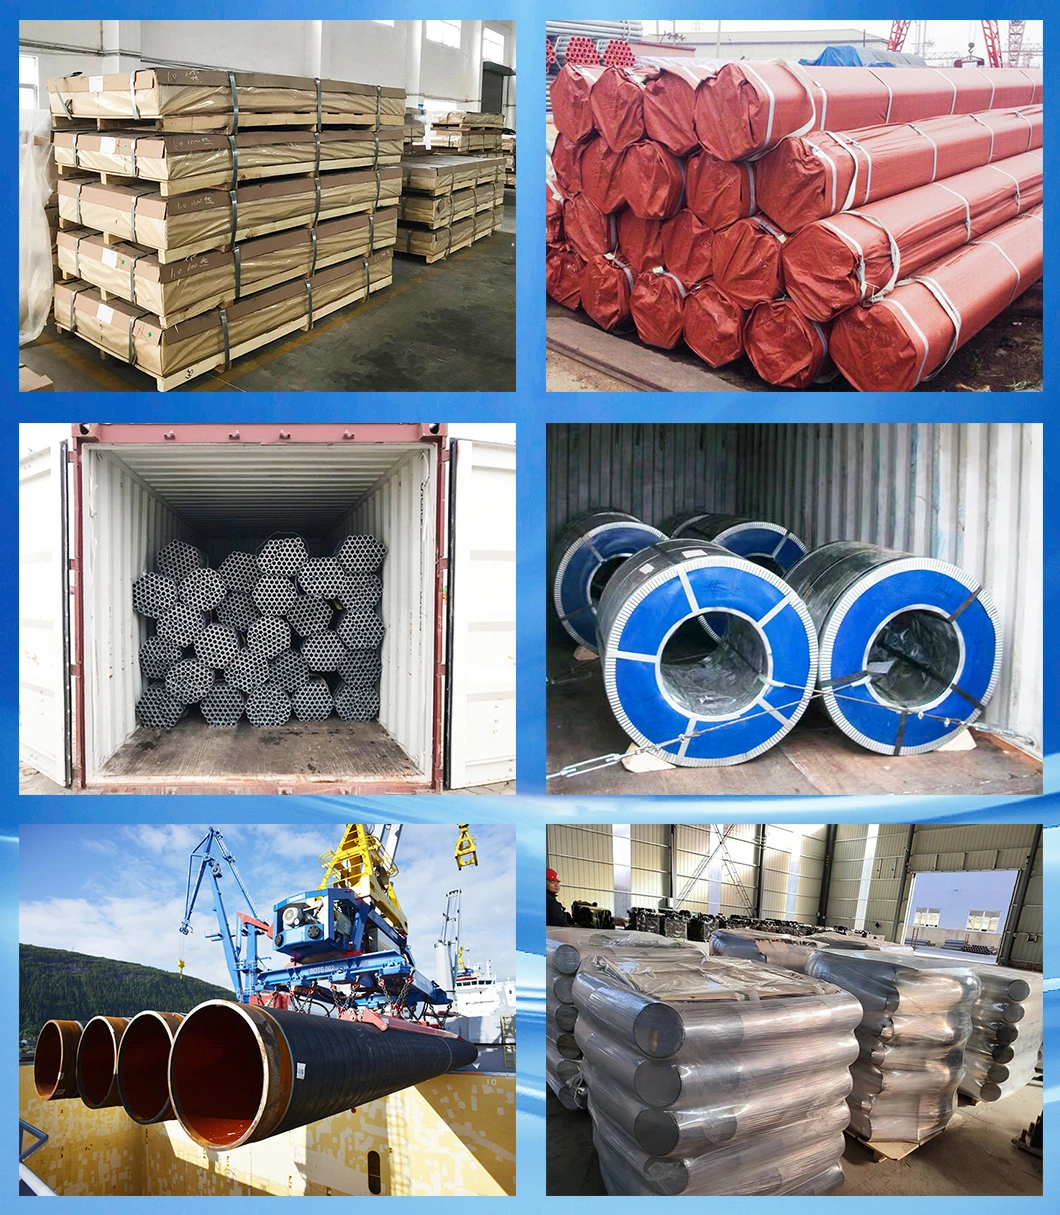 Wholesale ASTM a 106 Carbon Steel Seamless Pipe From China